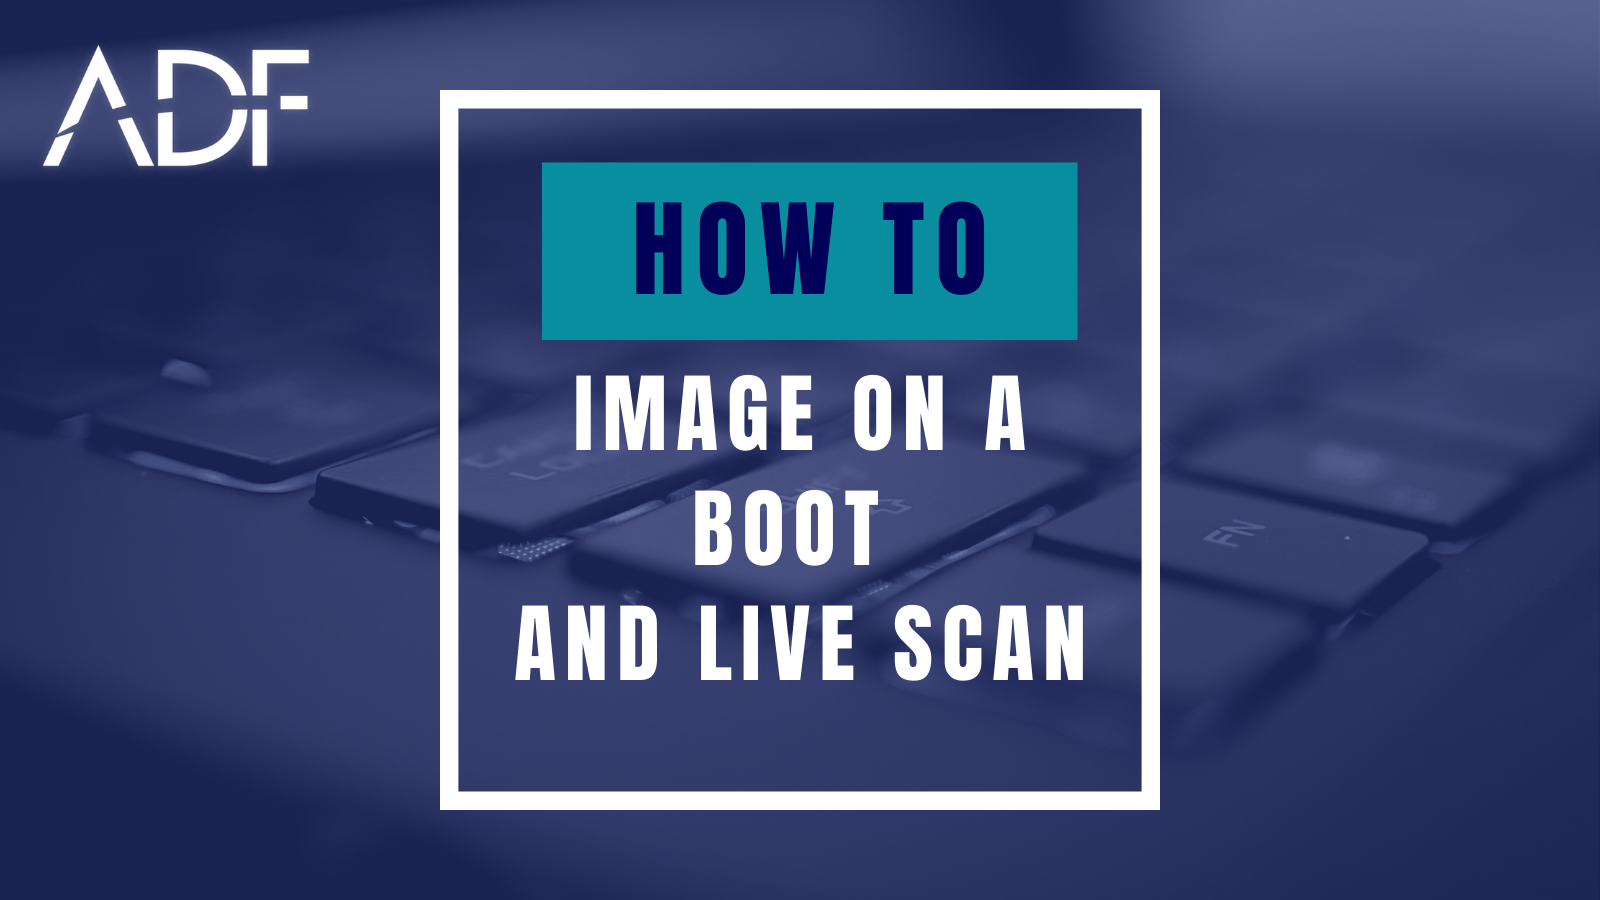 How-To Image on a Boot and Live Scan